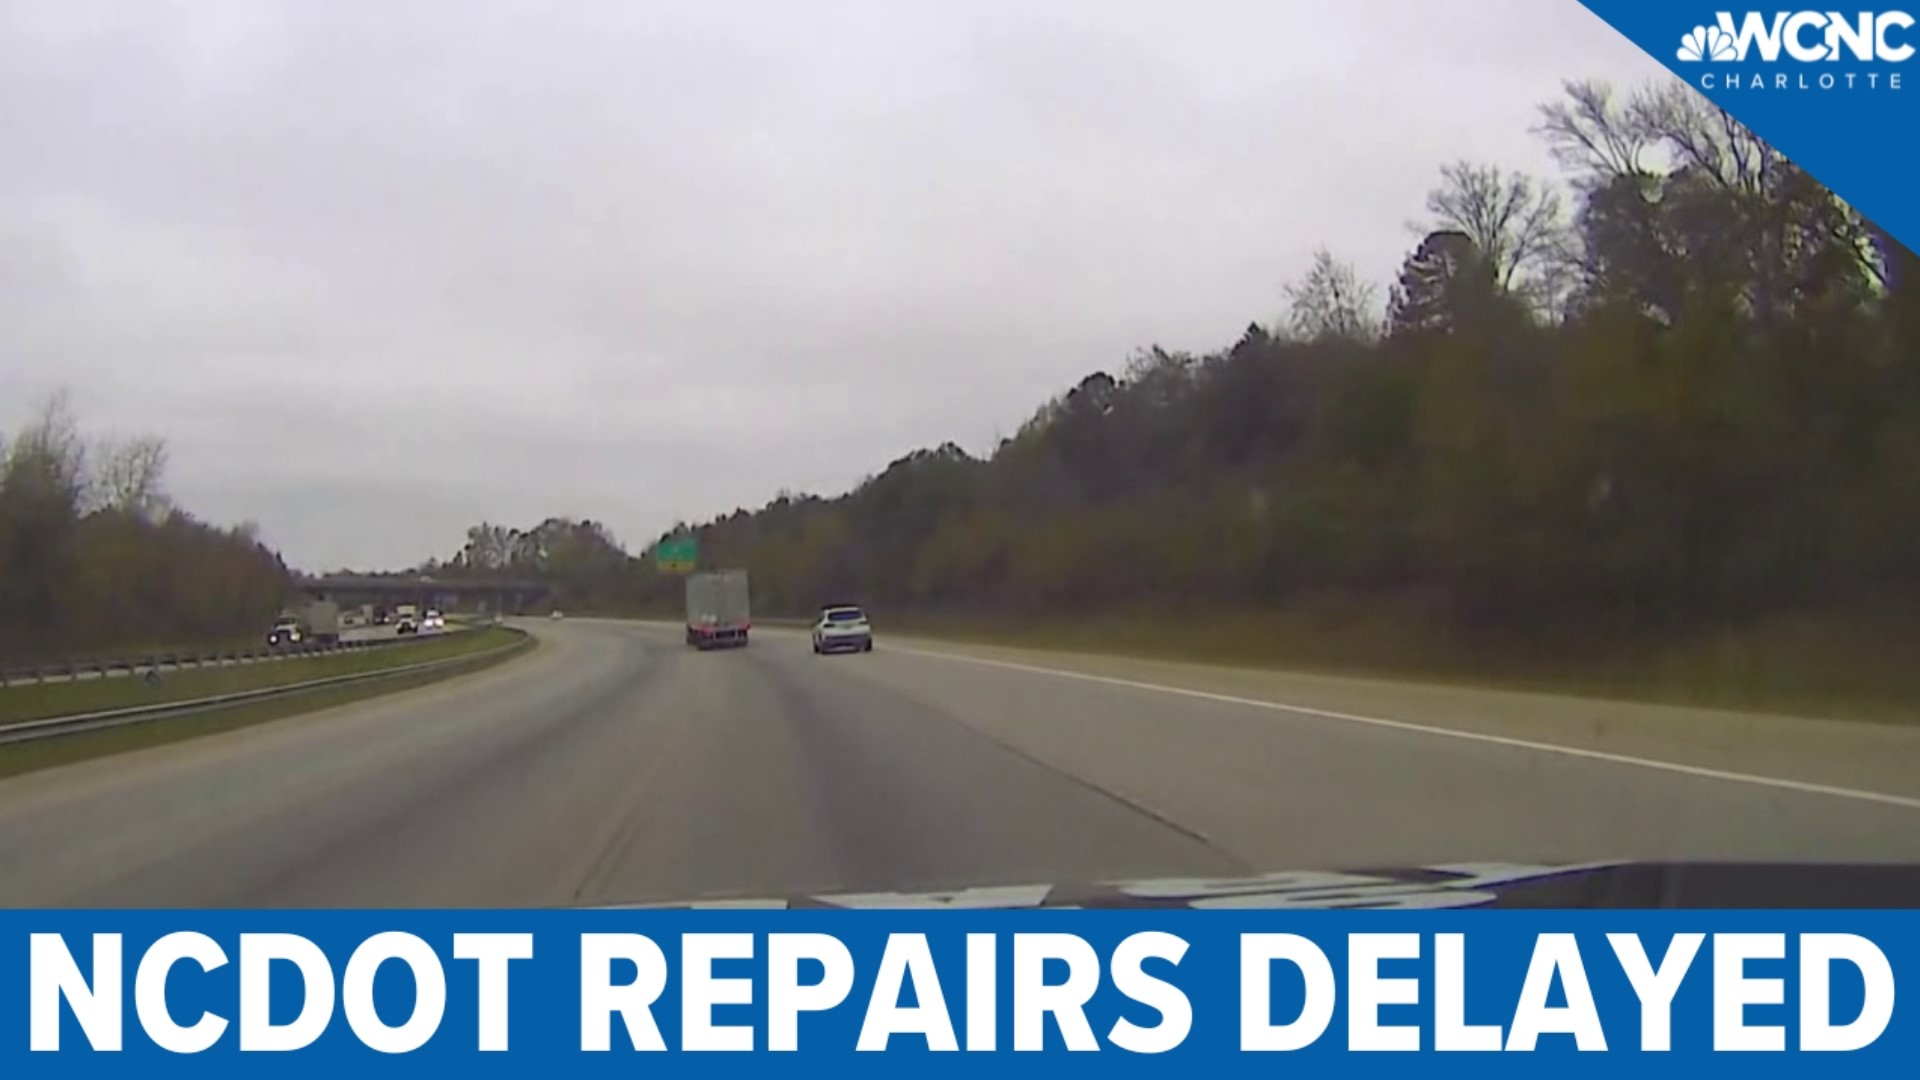 North Carolina DOT leaders are working to keep roads safe by making some much needed repairs.